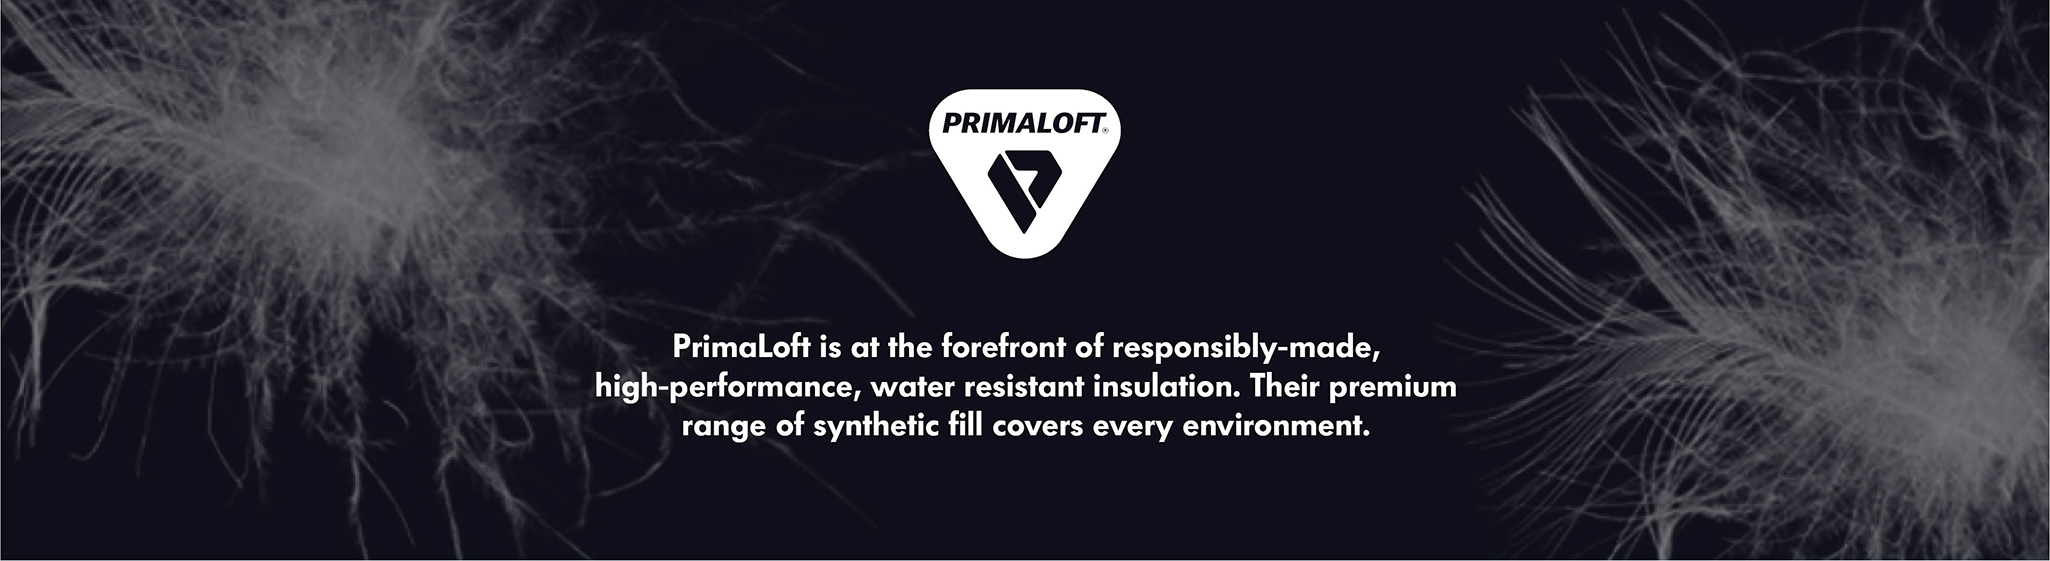 Primaloft, High performance water-resistant warmth, responsibly engineered from post-consumer recycled content